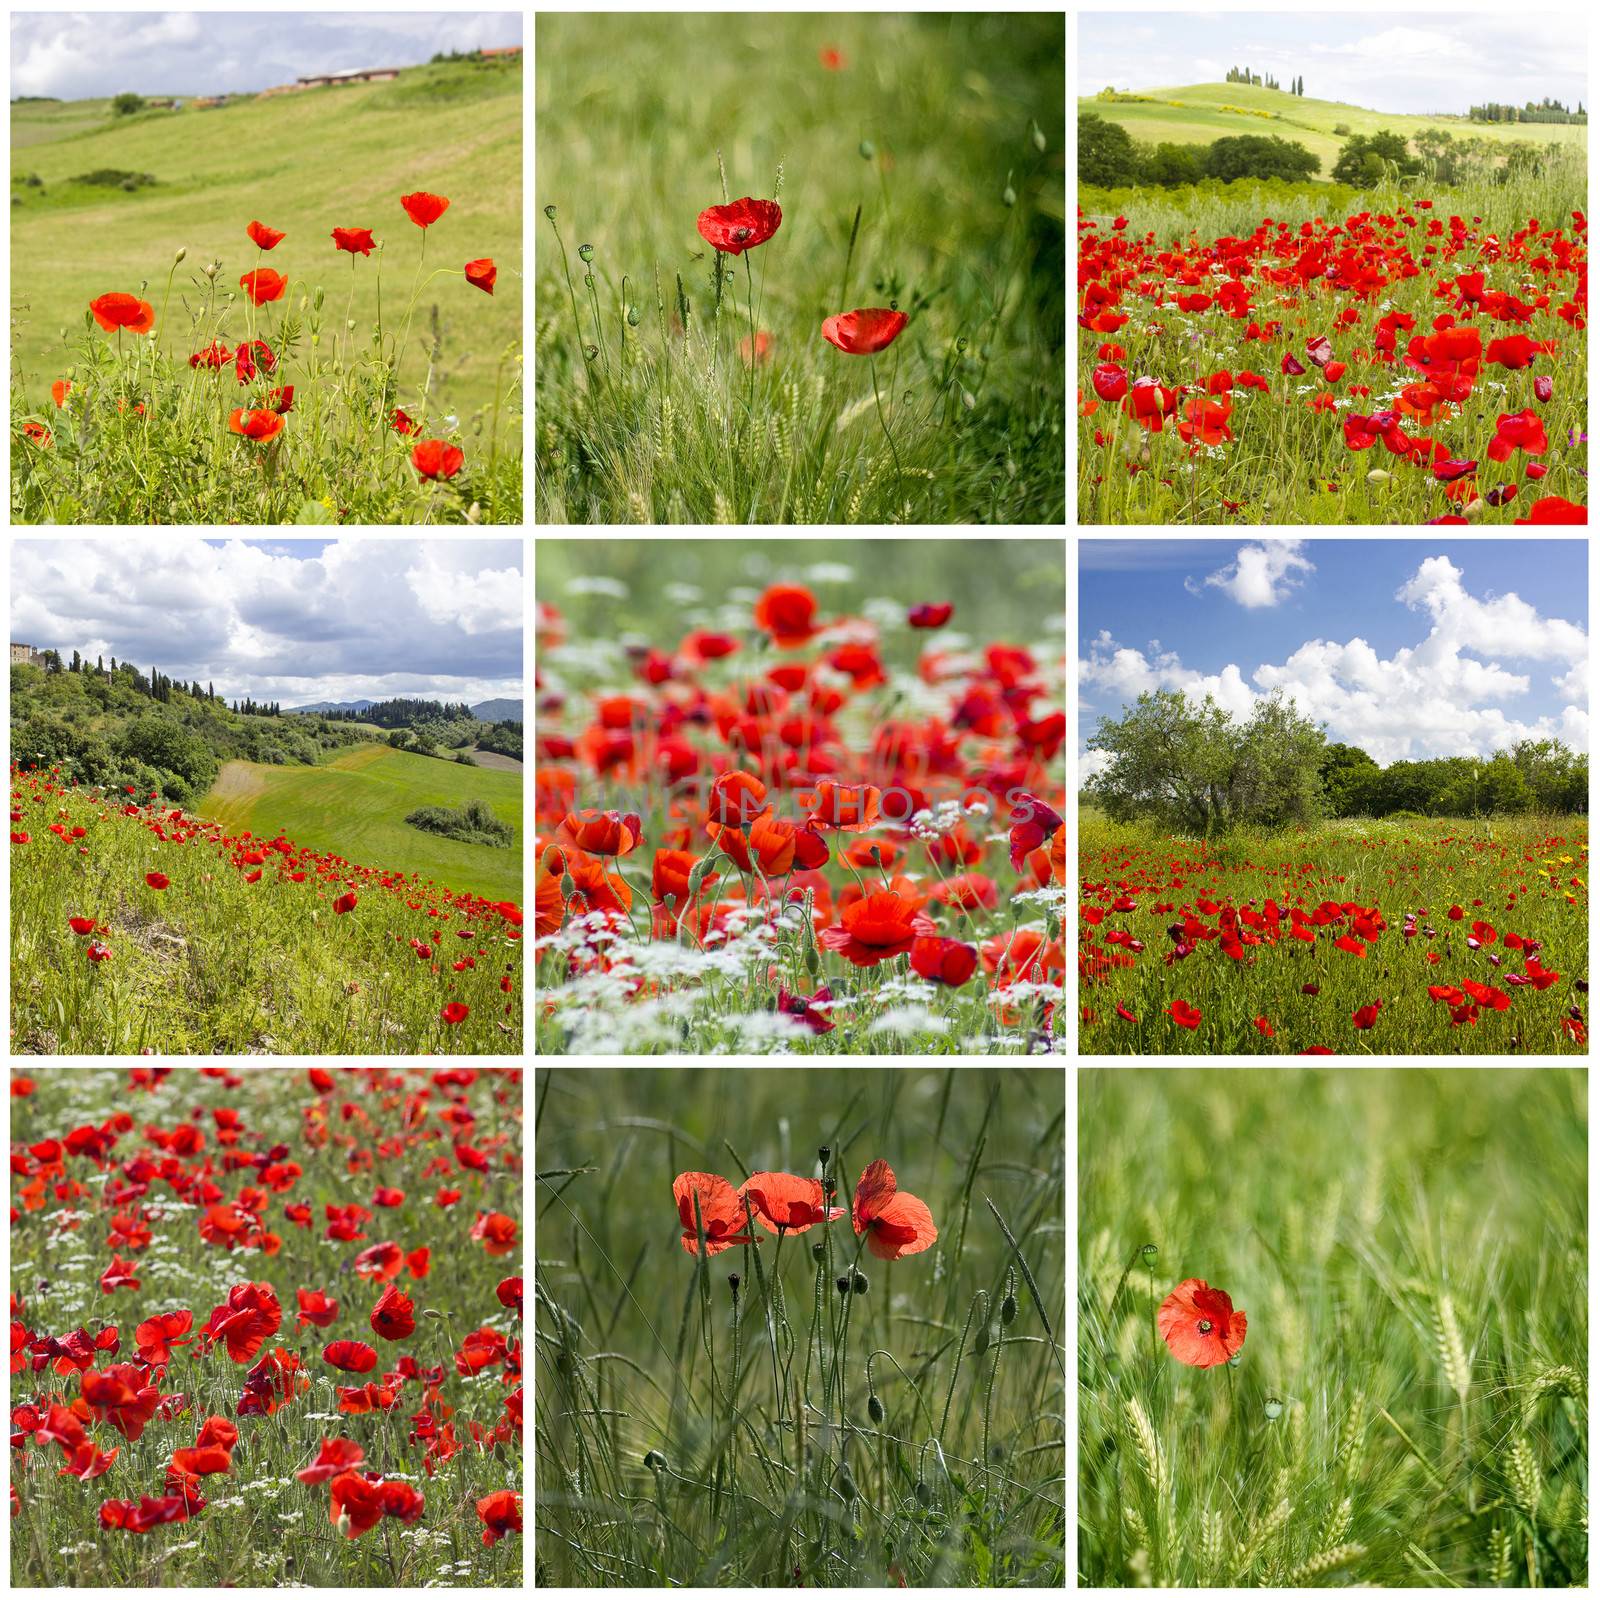 red poppies in Tuscany - collage by miradrozdowski